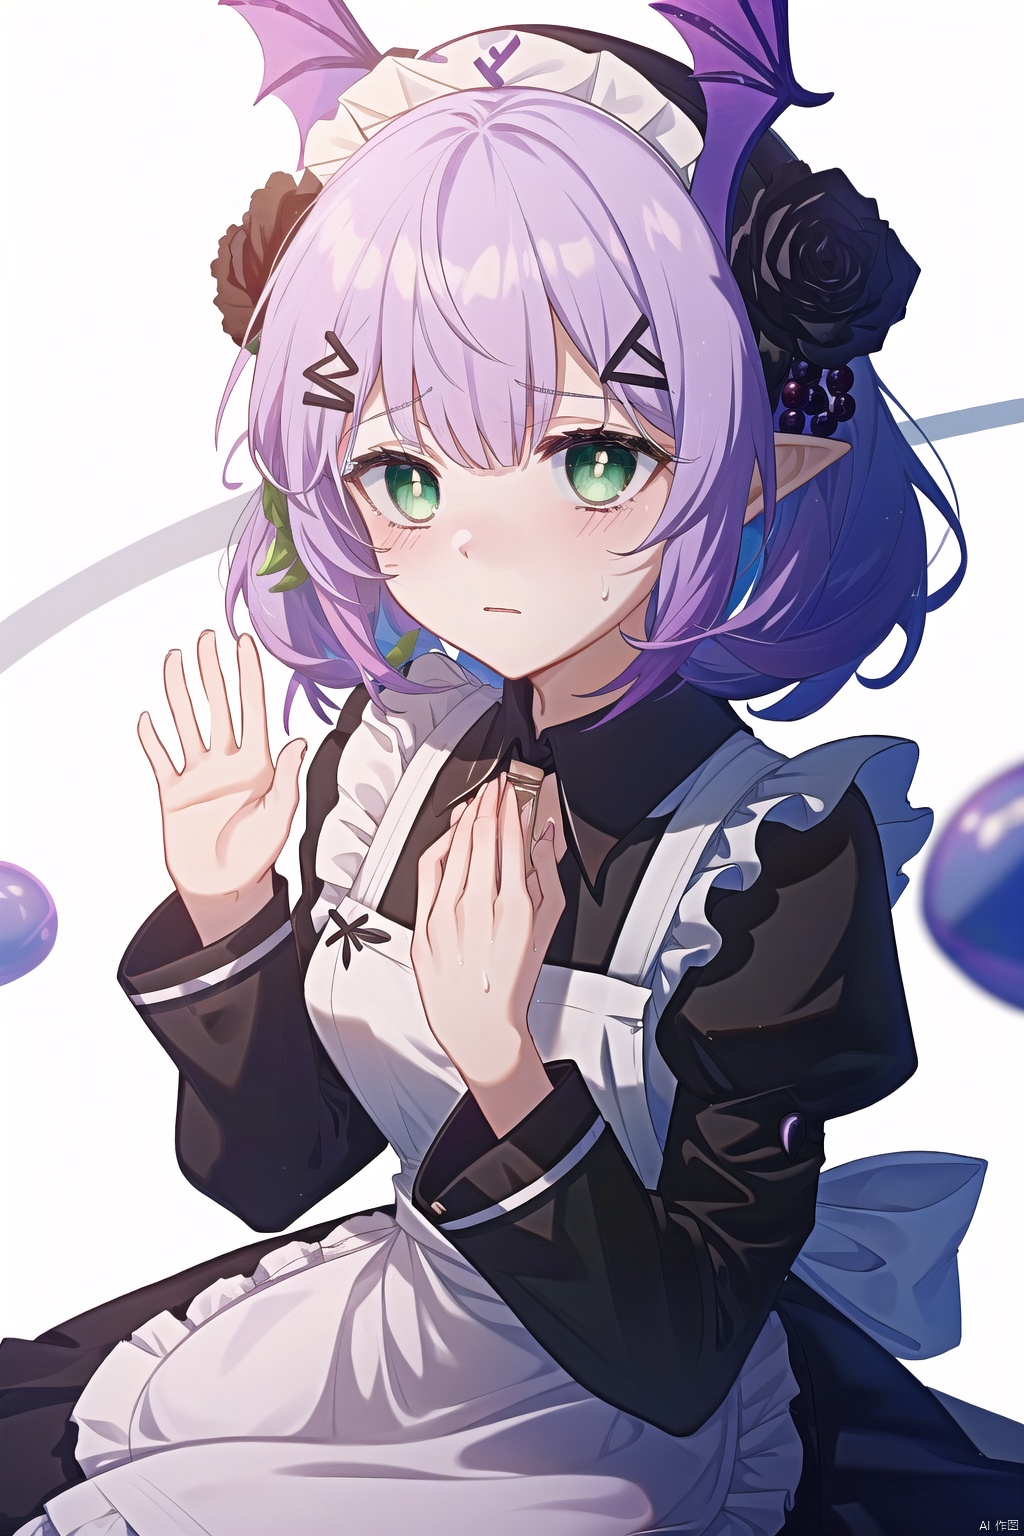 1 girl, gotoh hitori, @ _ @, black dress, cflustered, cube hair accessory, maid apron, raise hand, maid headwear, panic, beads of sweat, single, upper body, dynamic angle, white background, Kal'tsit, gummy_(arknights), green eyes,kaldef, a girl named arknian